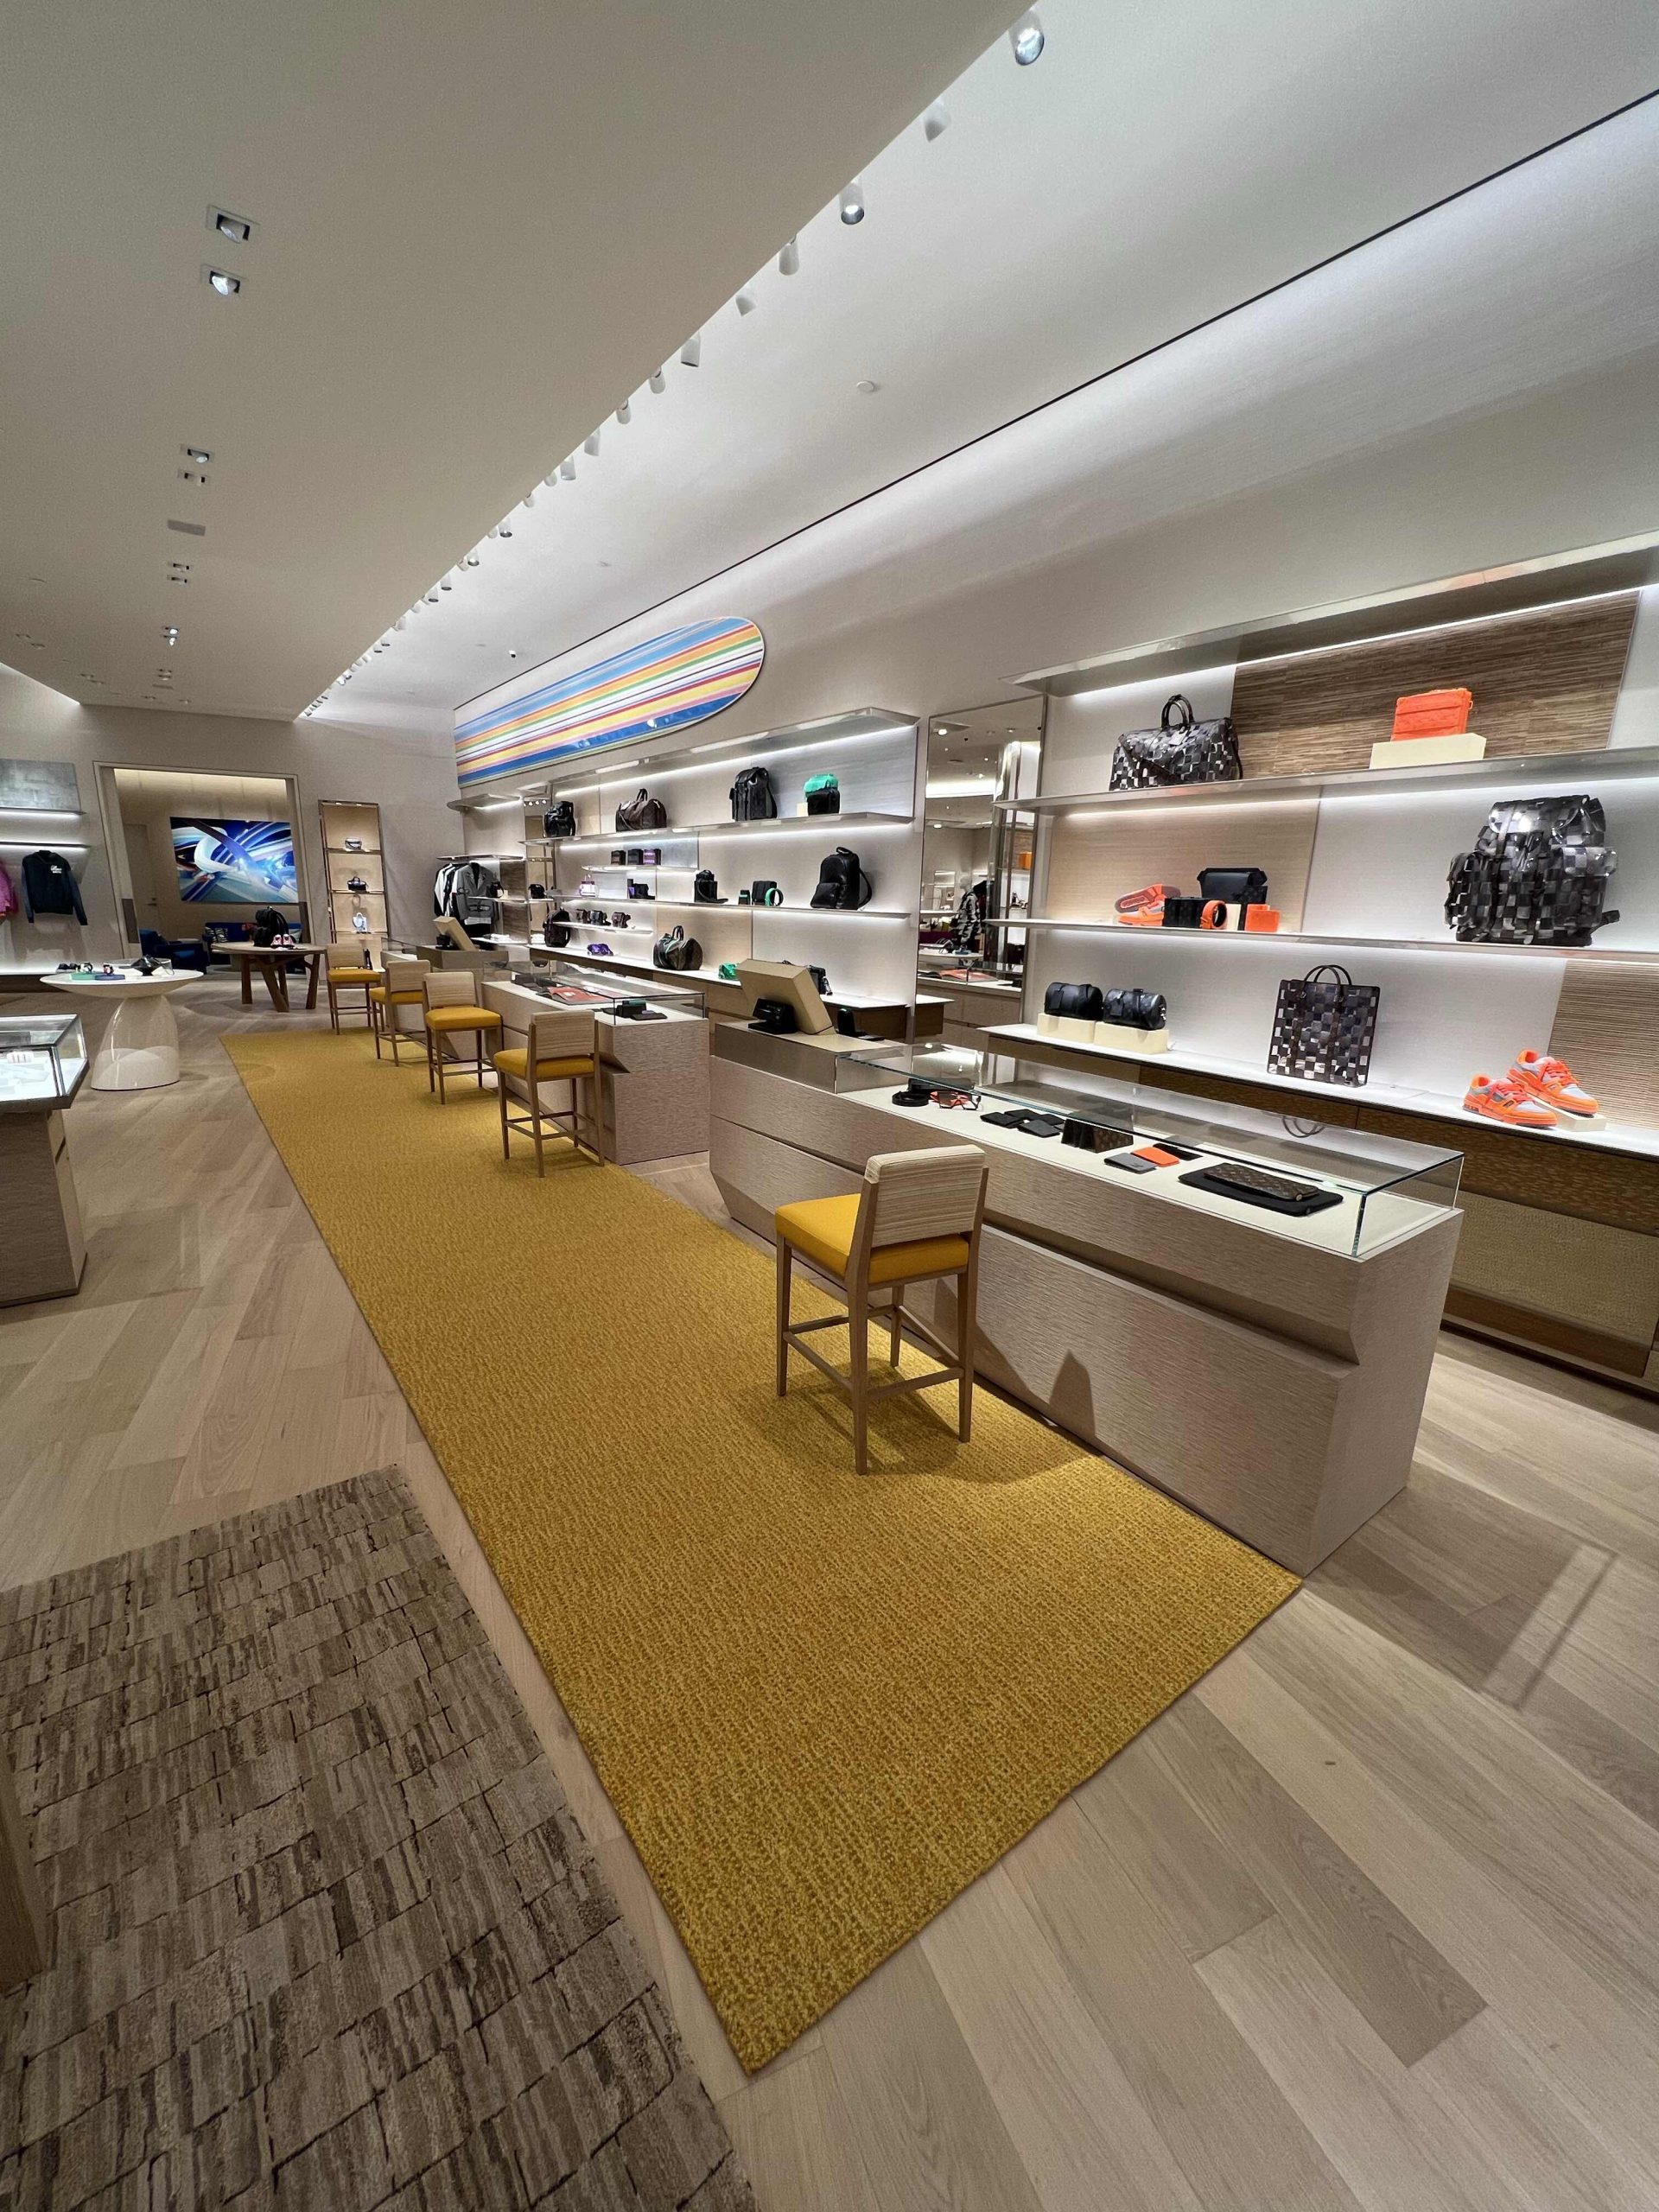 JRM Construction West Completes Multiple Build-outs for Louis Vuitton at South  Coast Plaza